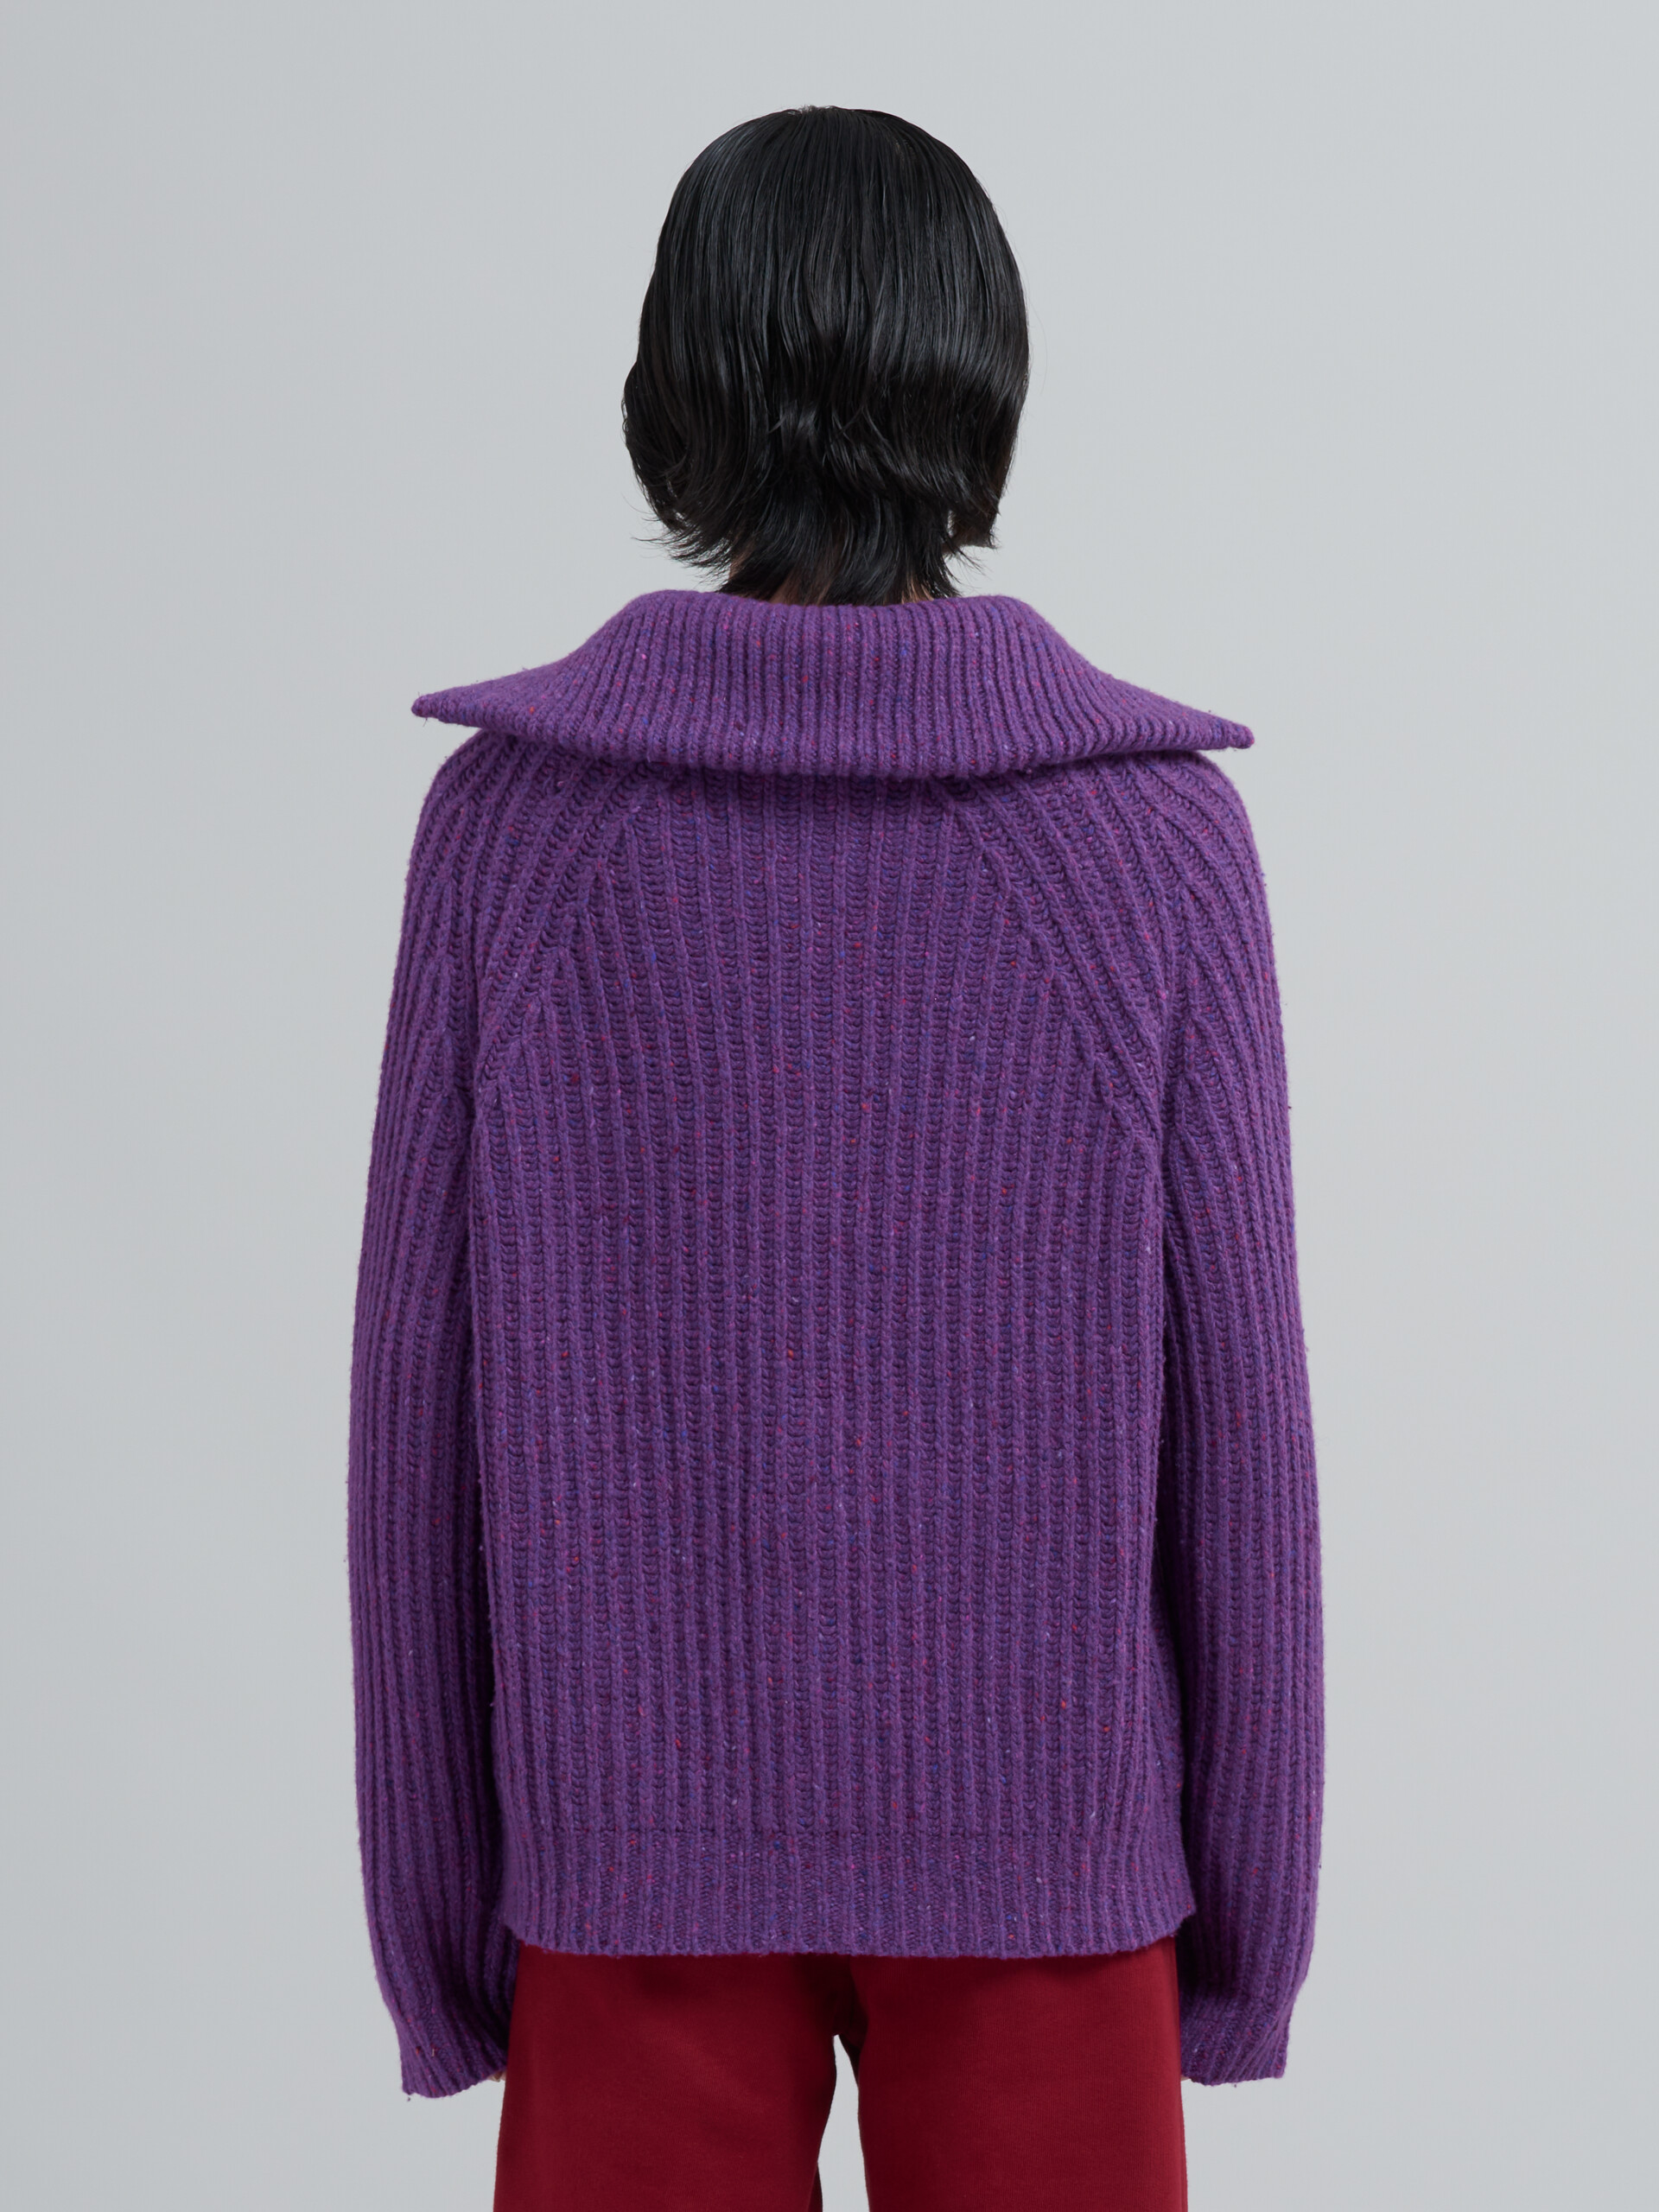 Recycled wool cardigan - Pullovers - Image 3